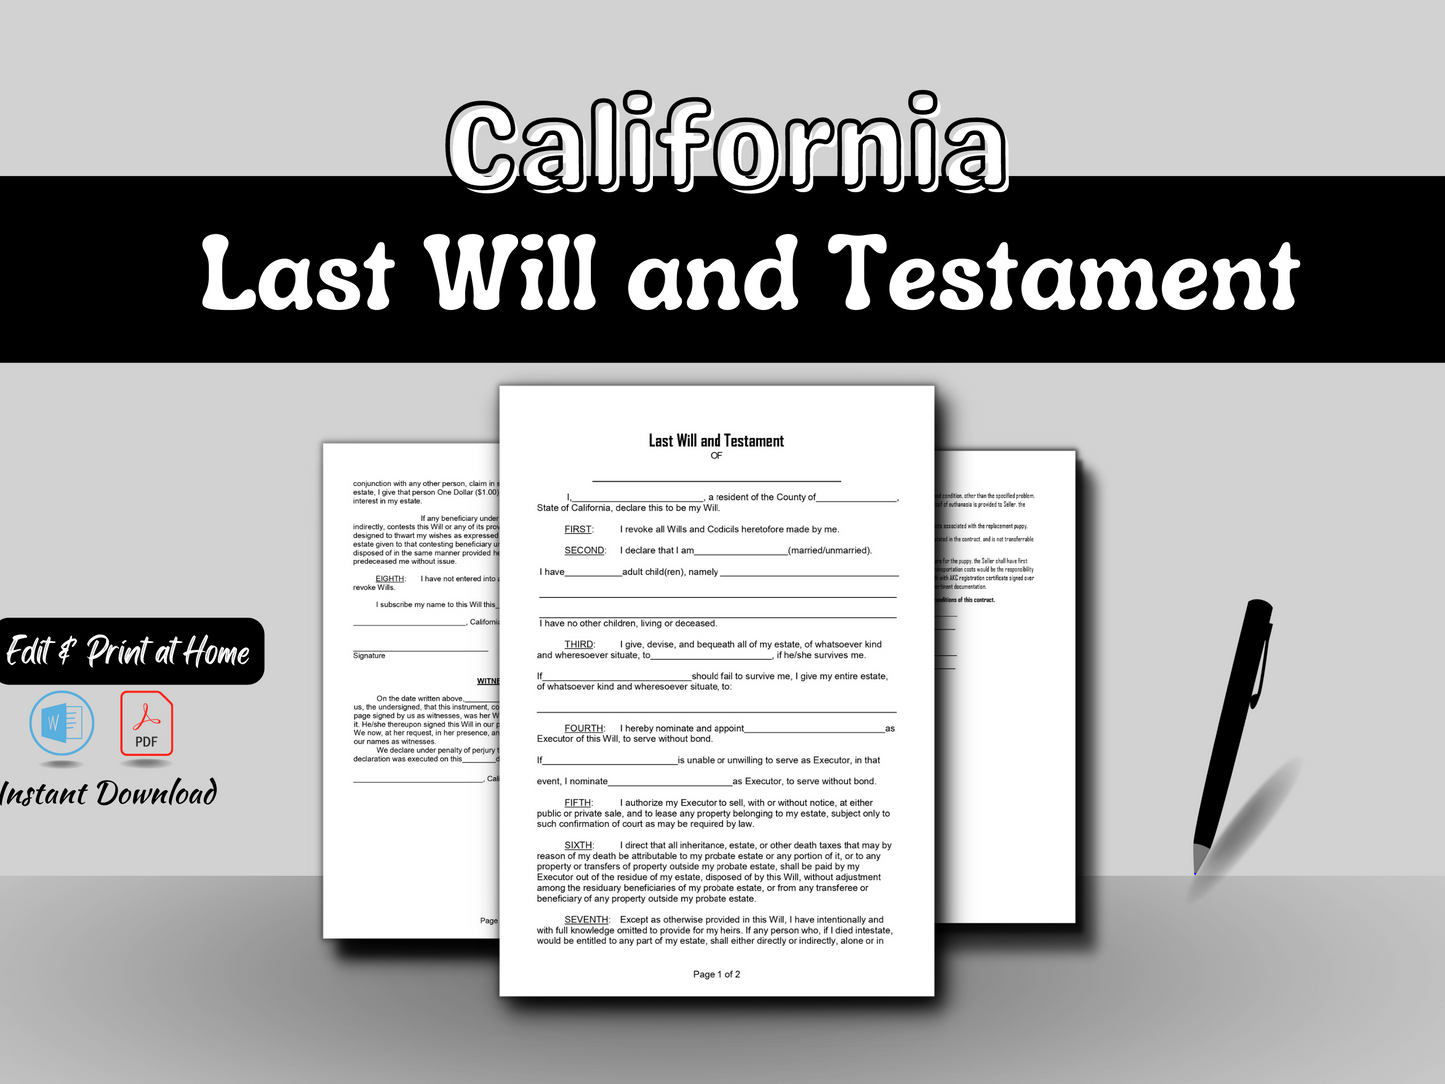 California Last Will and Testament | Editable in Word Document | Printable Legal PDF | Customizable Downloads Forms | Easy to Use - Drafted by an Attorney |